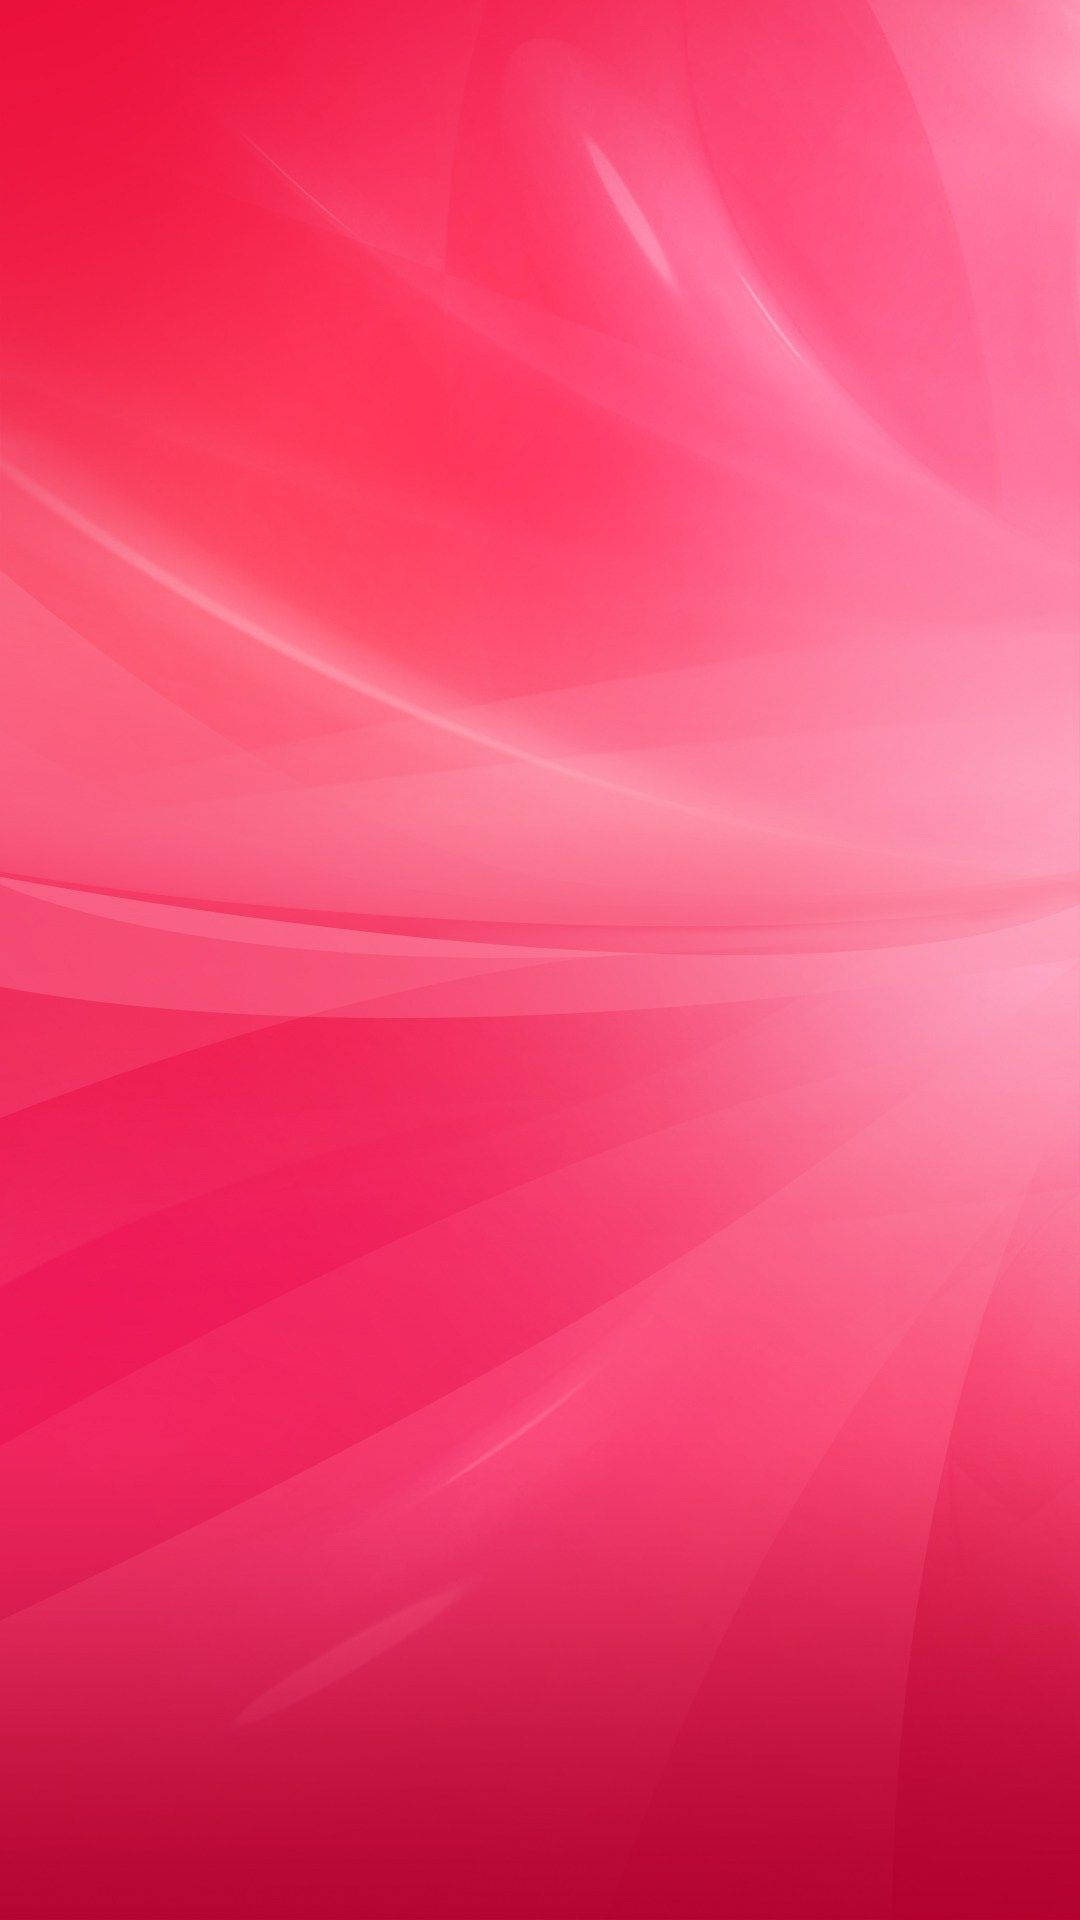 Stay stylish with a gorgeous pastel pink iPhone Wallpaper